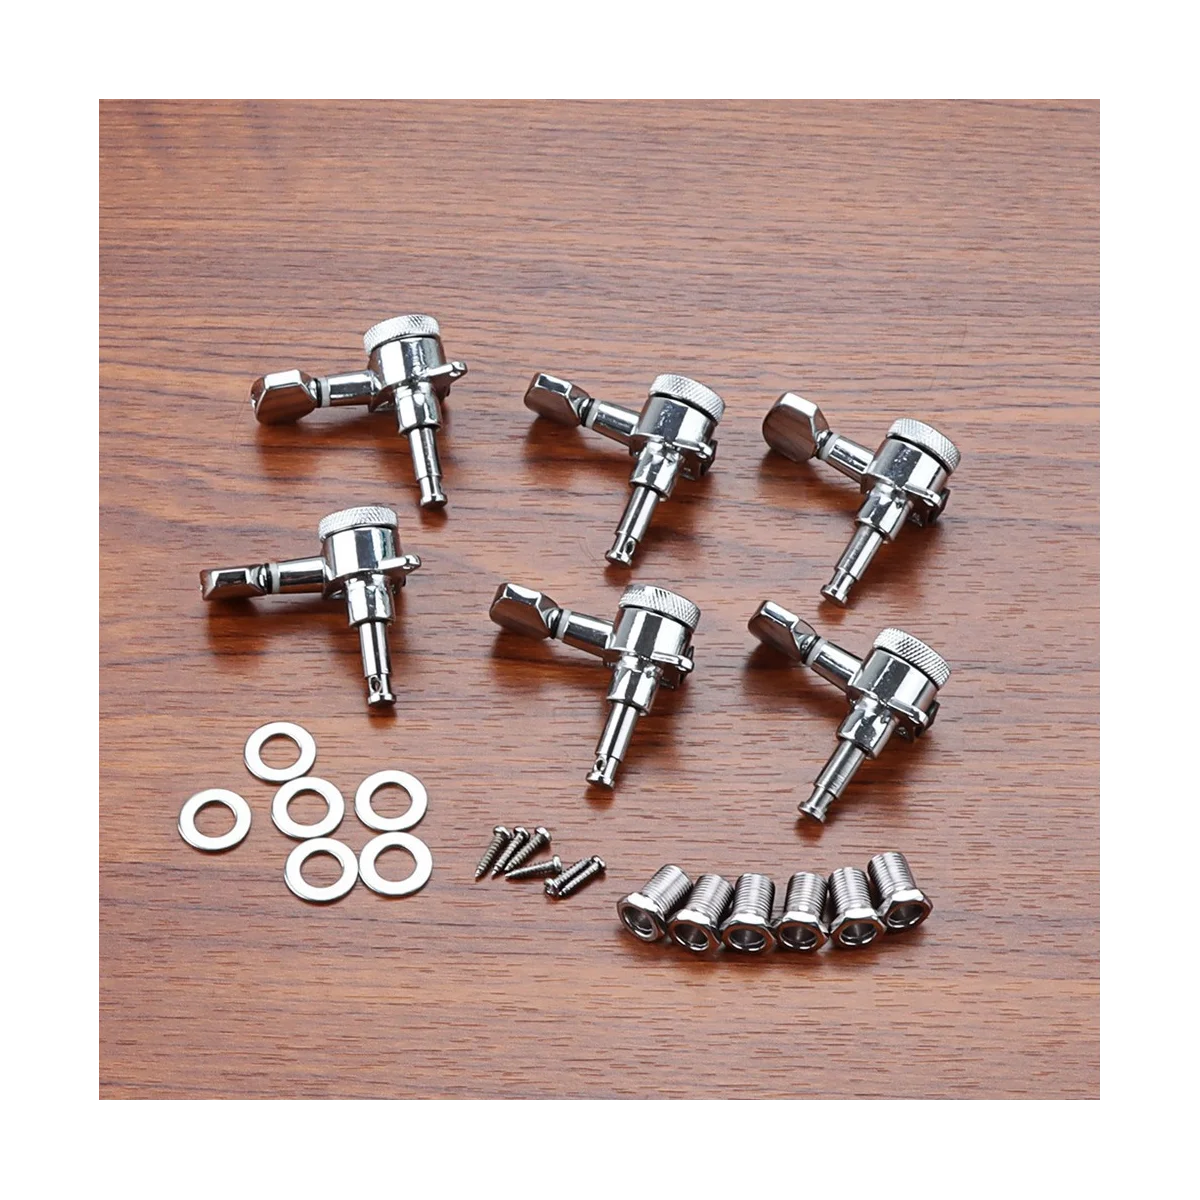 

6L Locking Guitar Tuning Pegs Tuning Keys Machines Heads String Tuners for Electric Guitar Acoustic Guitar Parts